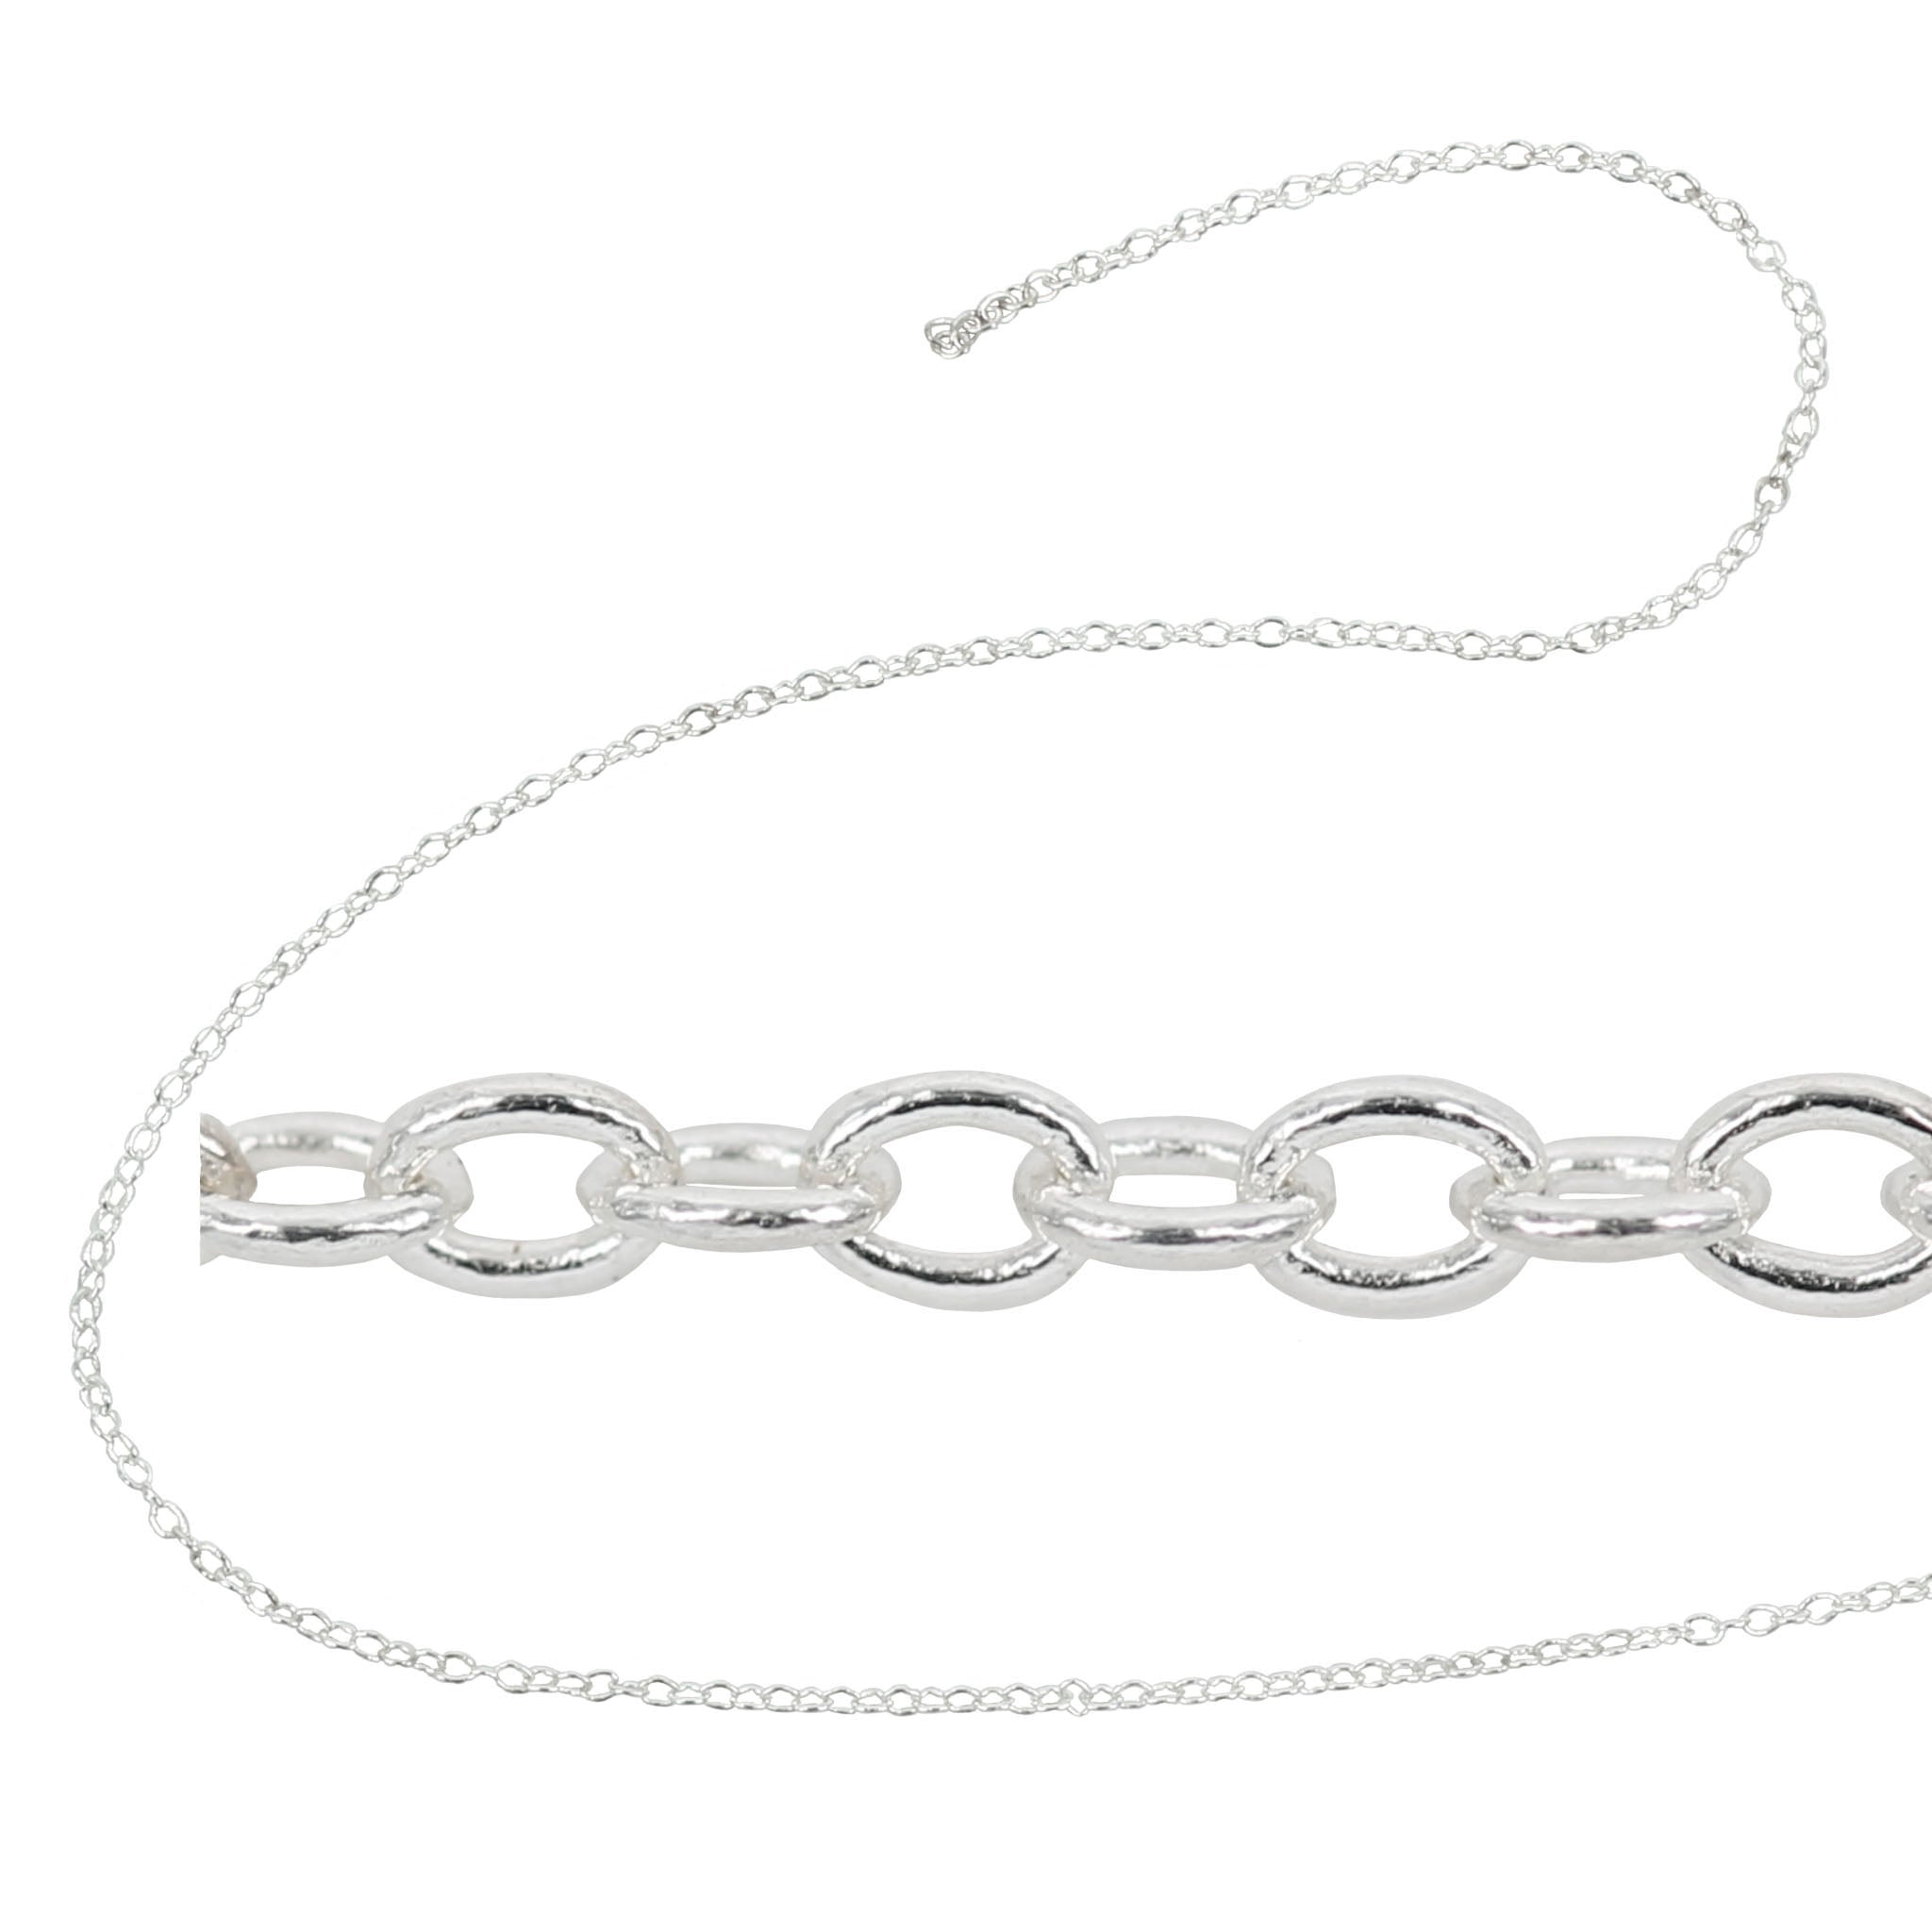 Cable Chain (thicker) in Sterling Silver 1.2mm x 1.6mm Links